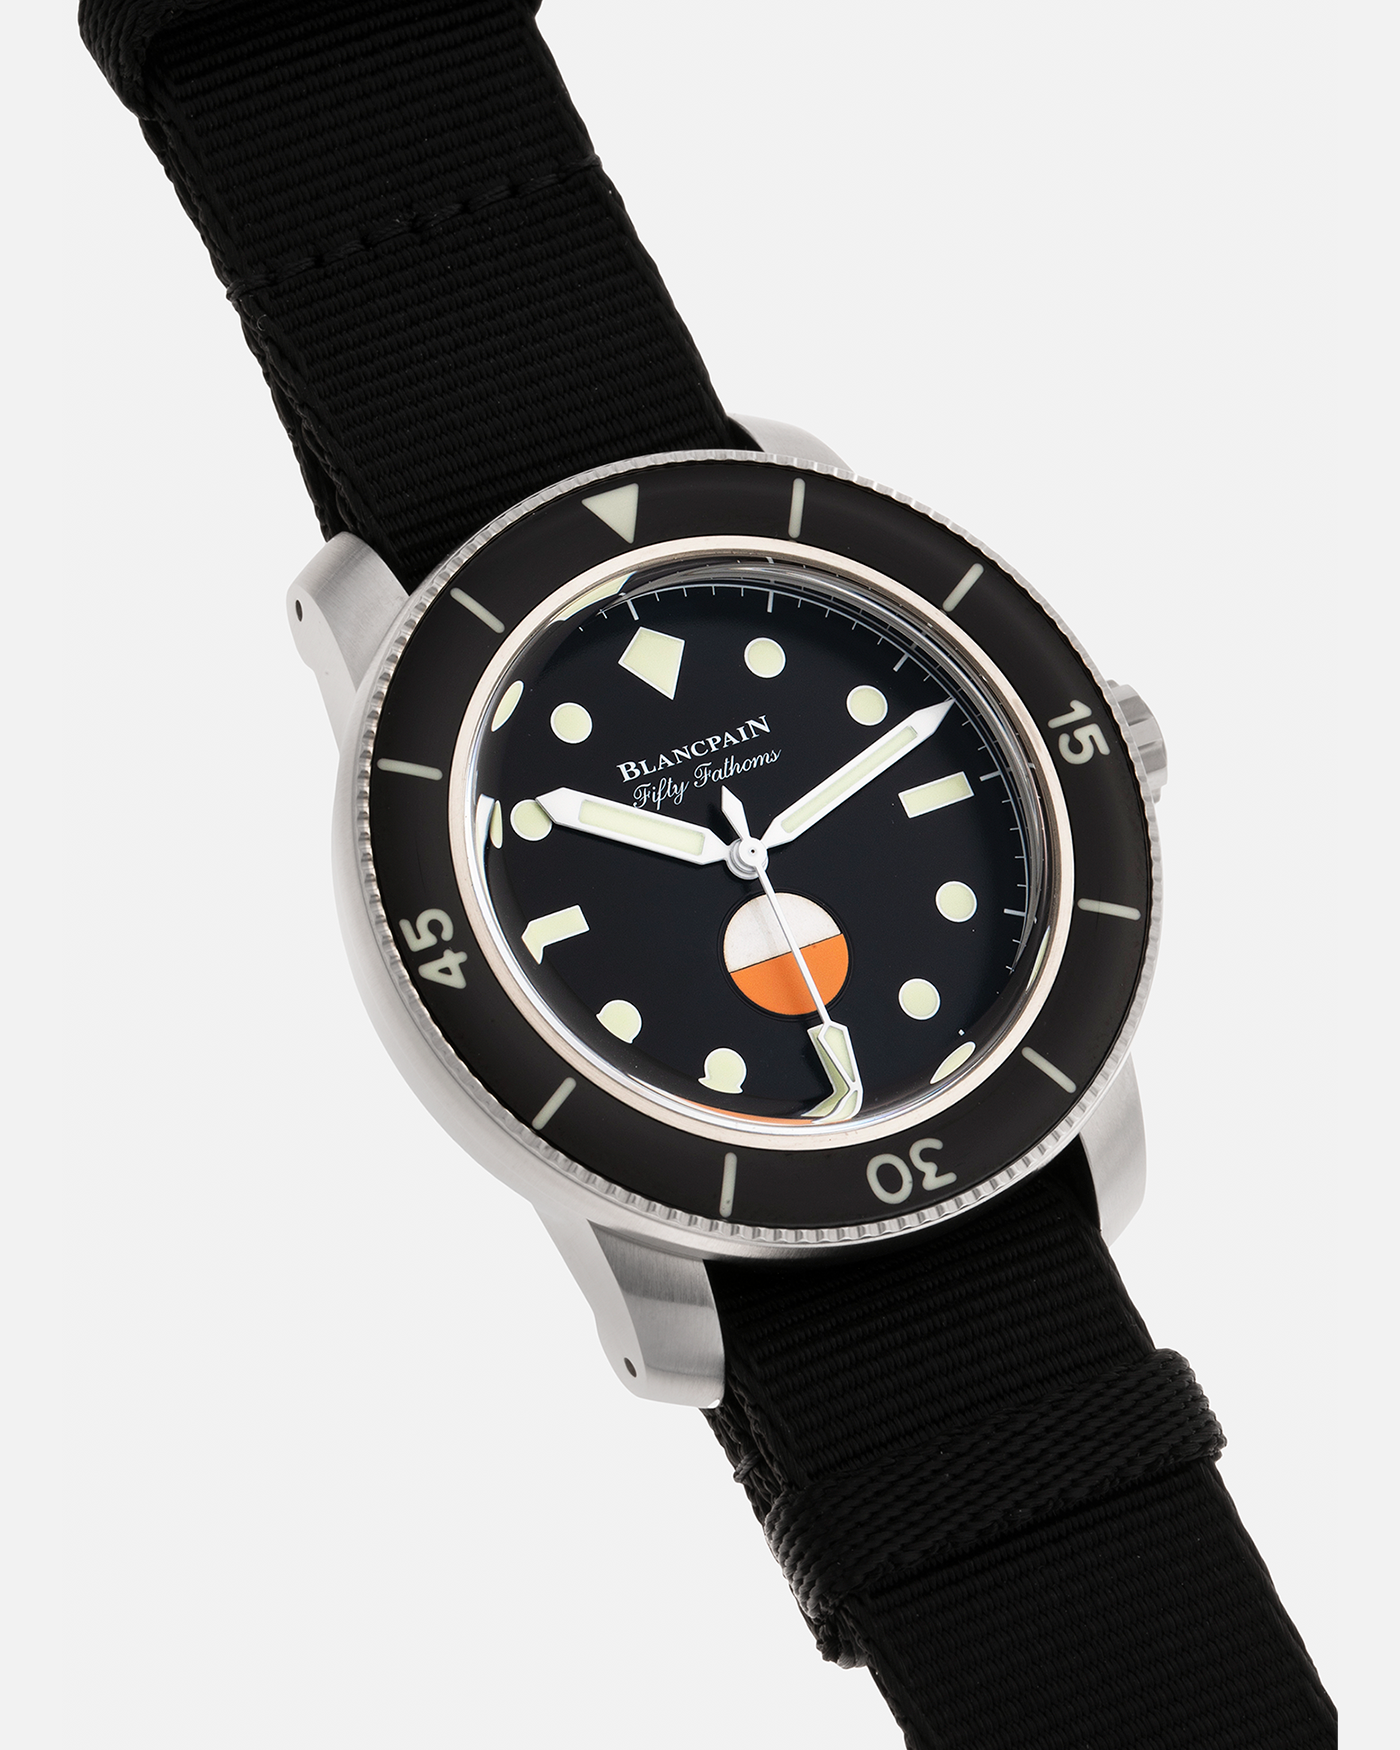 Brand: Blancpain Year: 2020 Model: Fifty Fathoms Mil Spec Hodinkee Edition Reference Number: 5008 11B30 NABA Material: Stainless Steel Movement: Automatic Blancpain 1154 Case Diameter: 40mm Bracelet/Strap: Blancpain Black NATO Strap